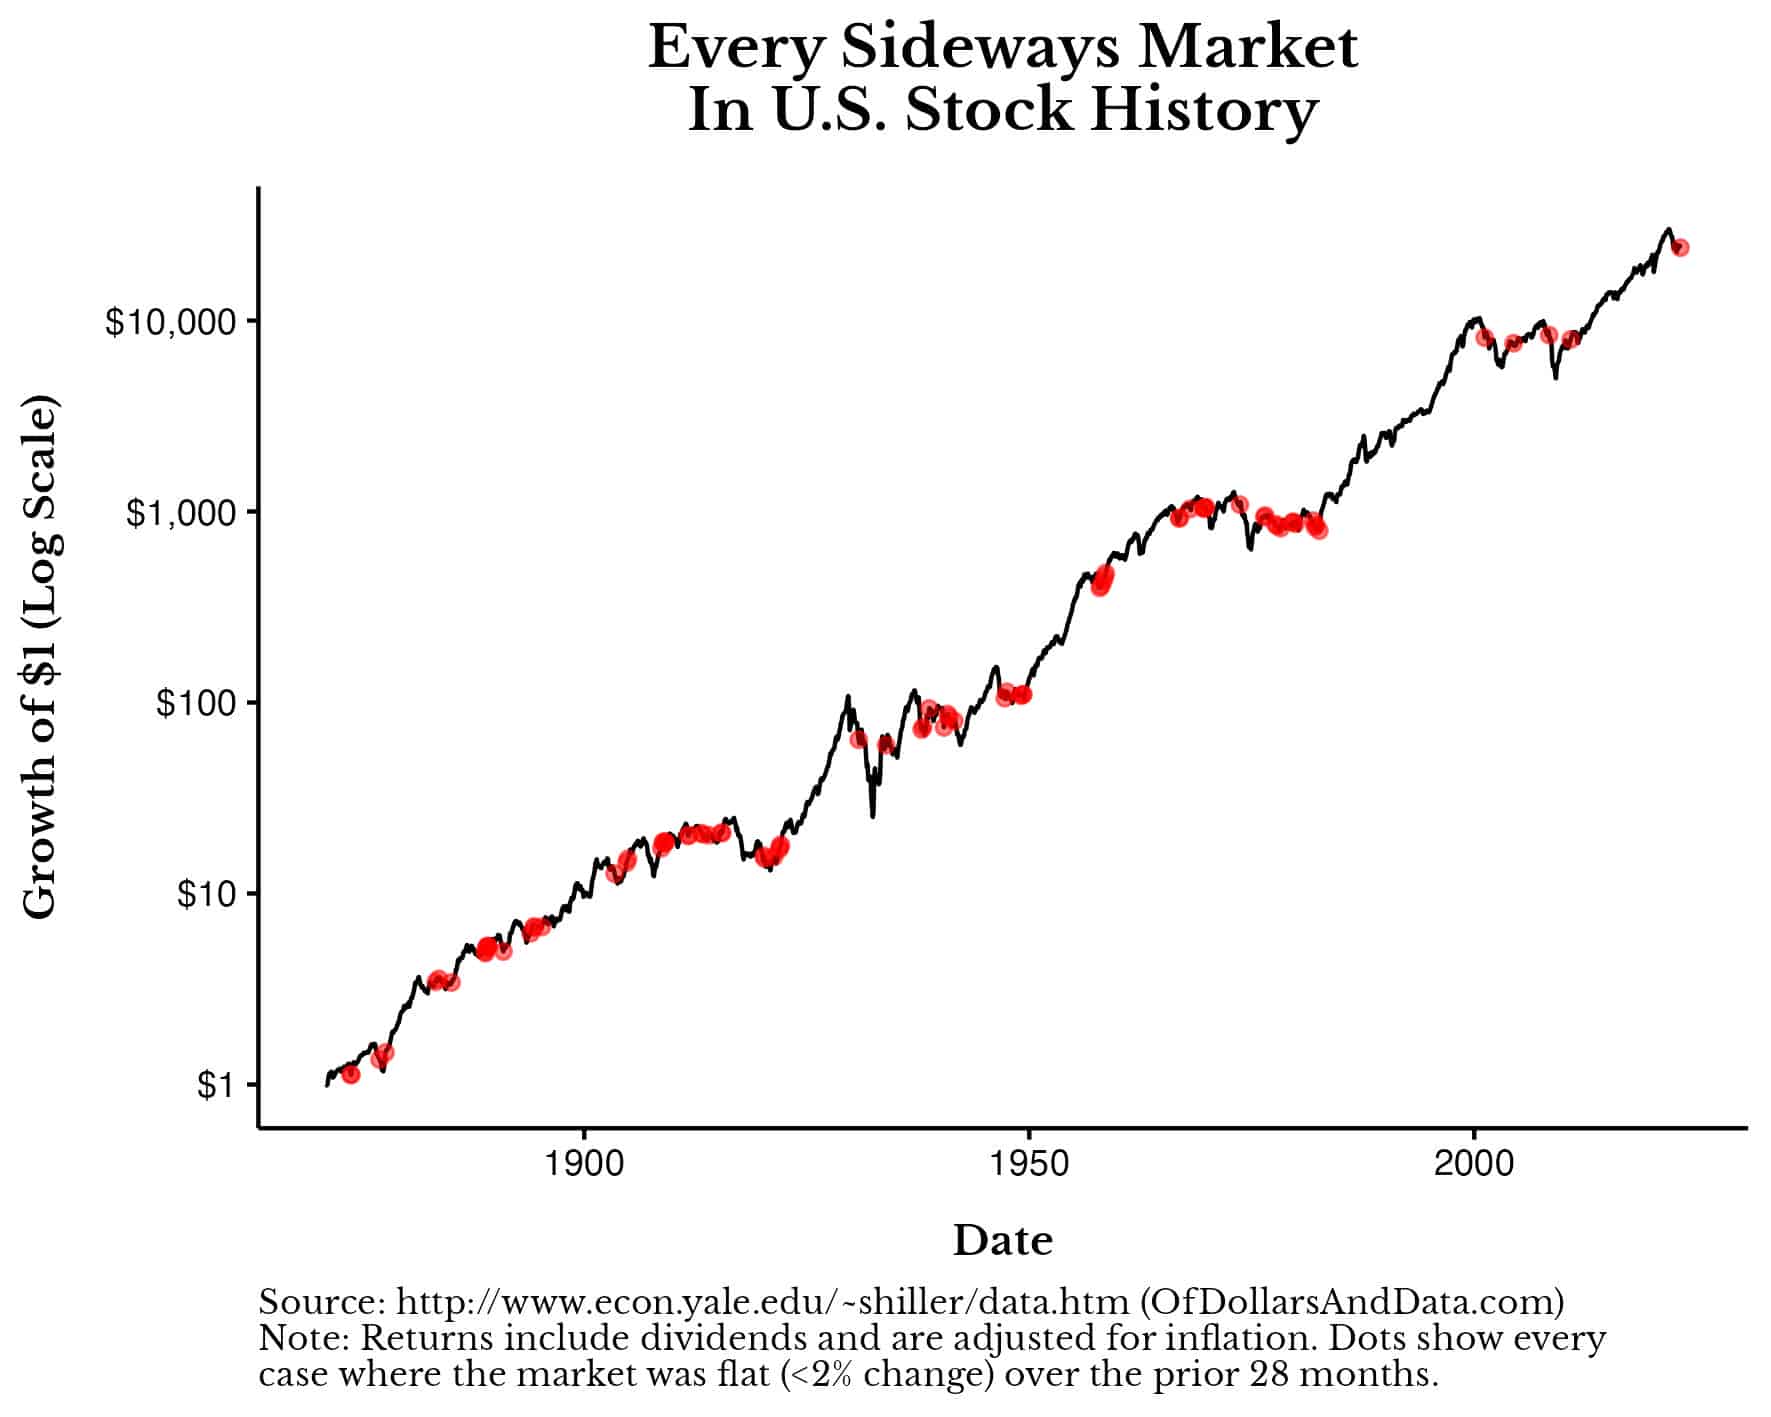 Line chart of the growth in the U.S. stock market with every sideways market noted with a red dot.